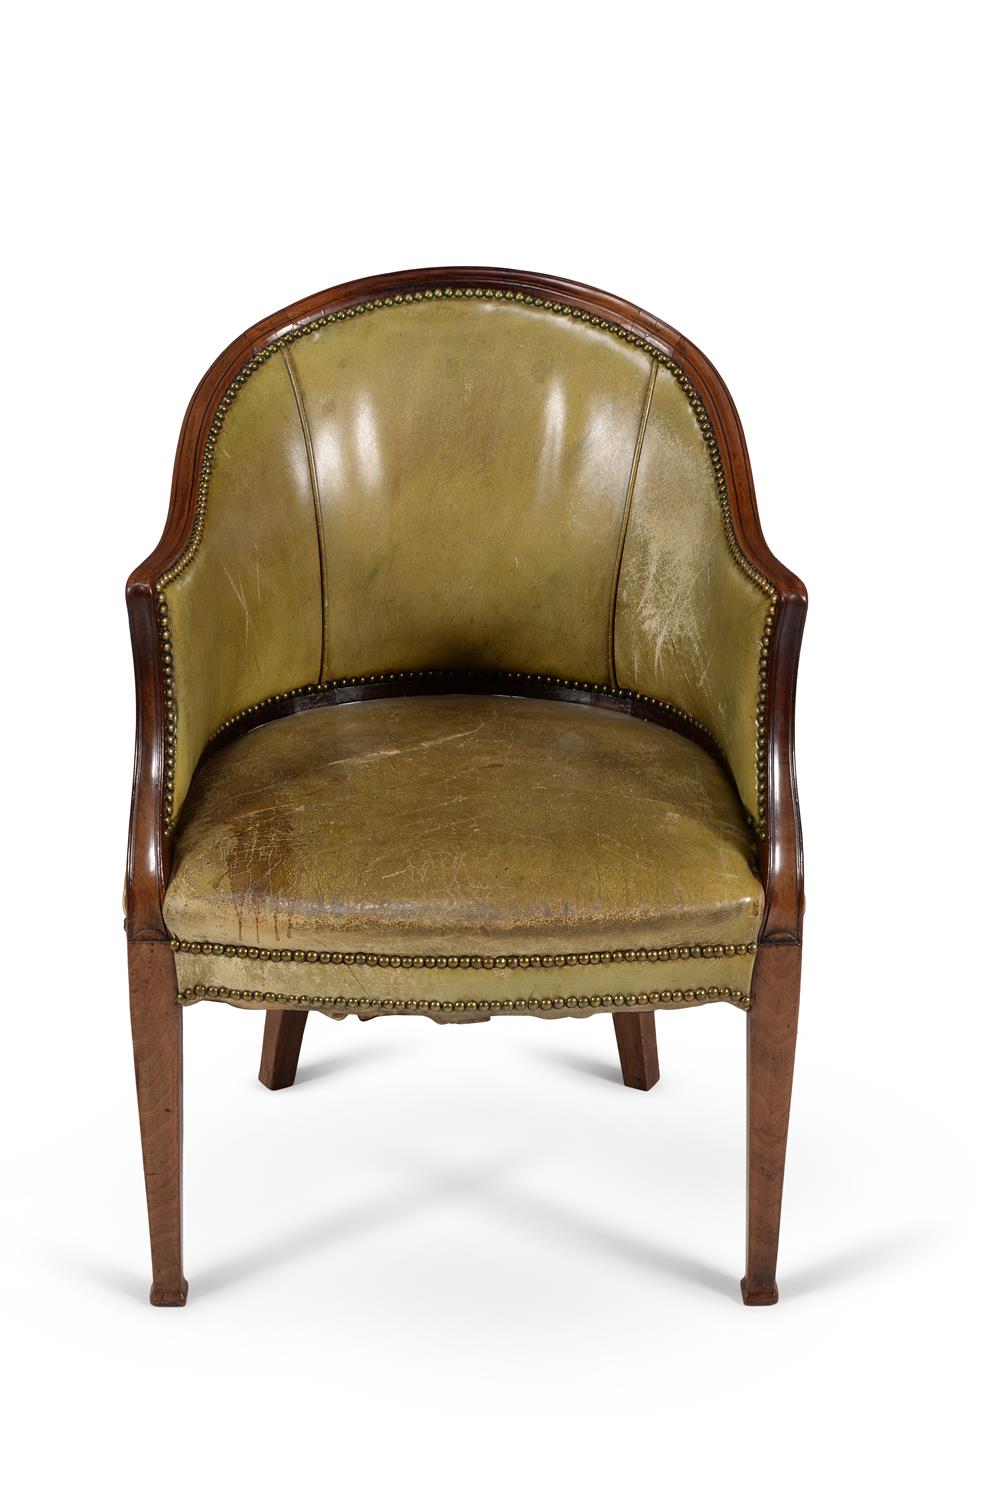 A late George III mahogany and green leather upholstered tub armchair - Image 2 of 3